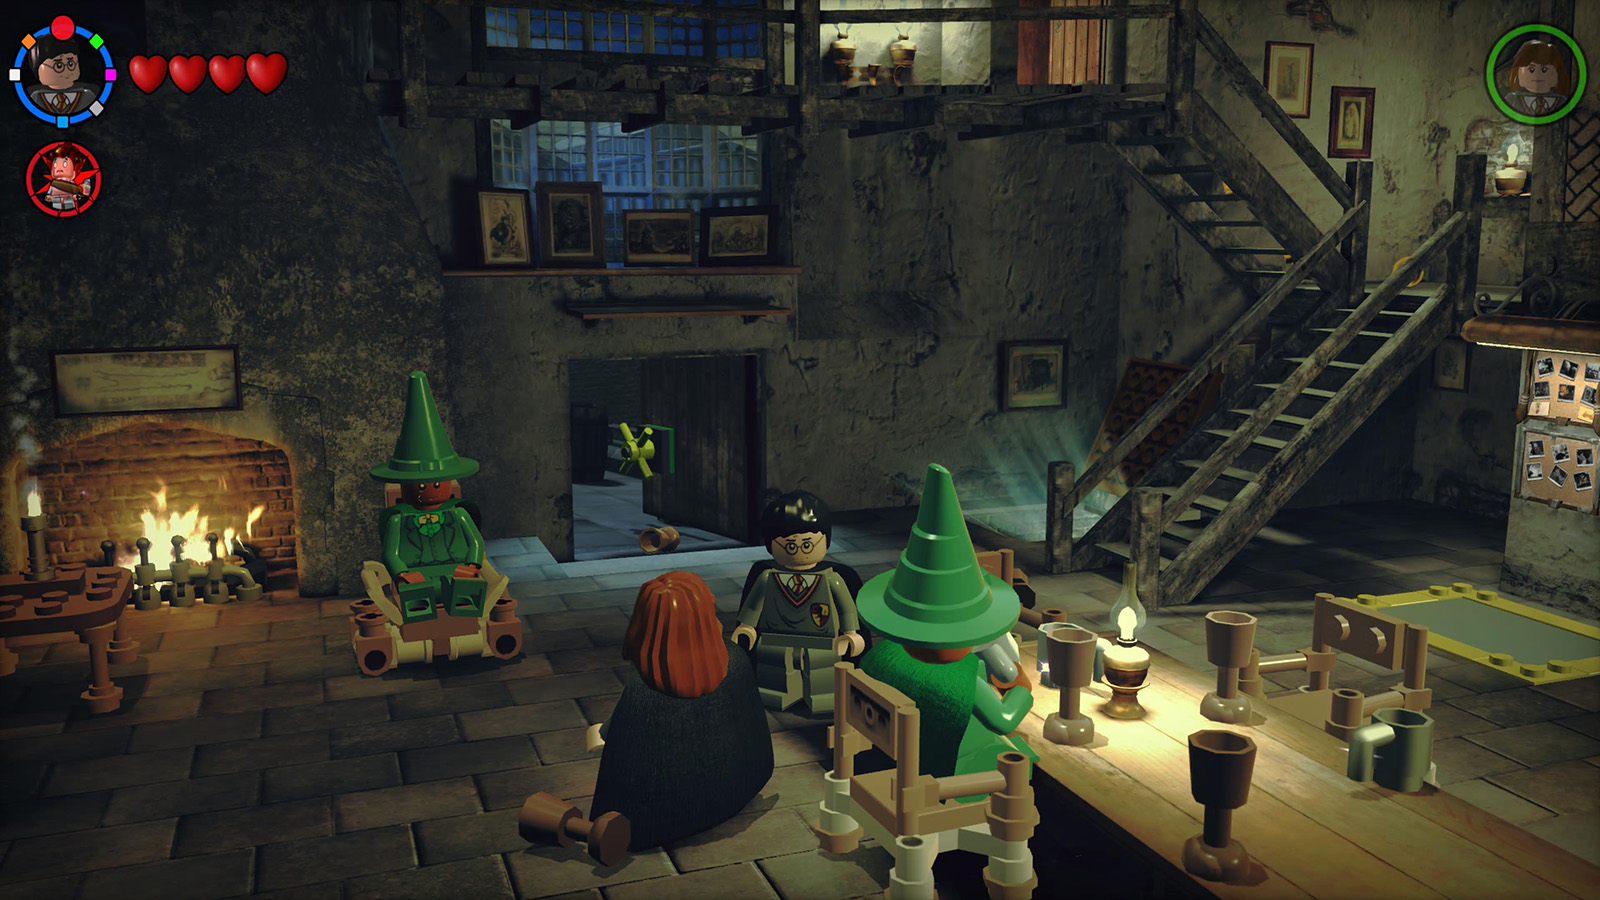 lego-harry-potter-years-5-7-full-game-story-mode-longplay-let-s-play